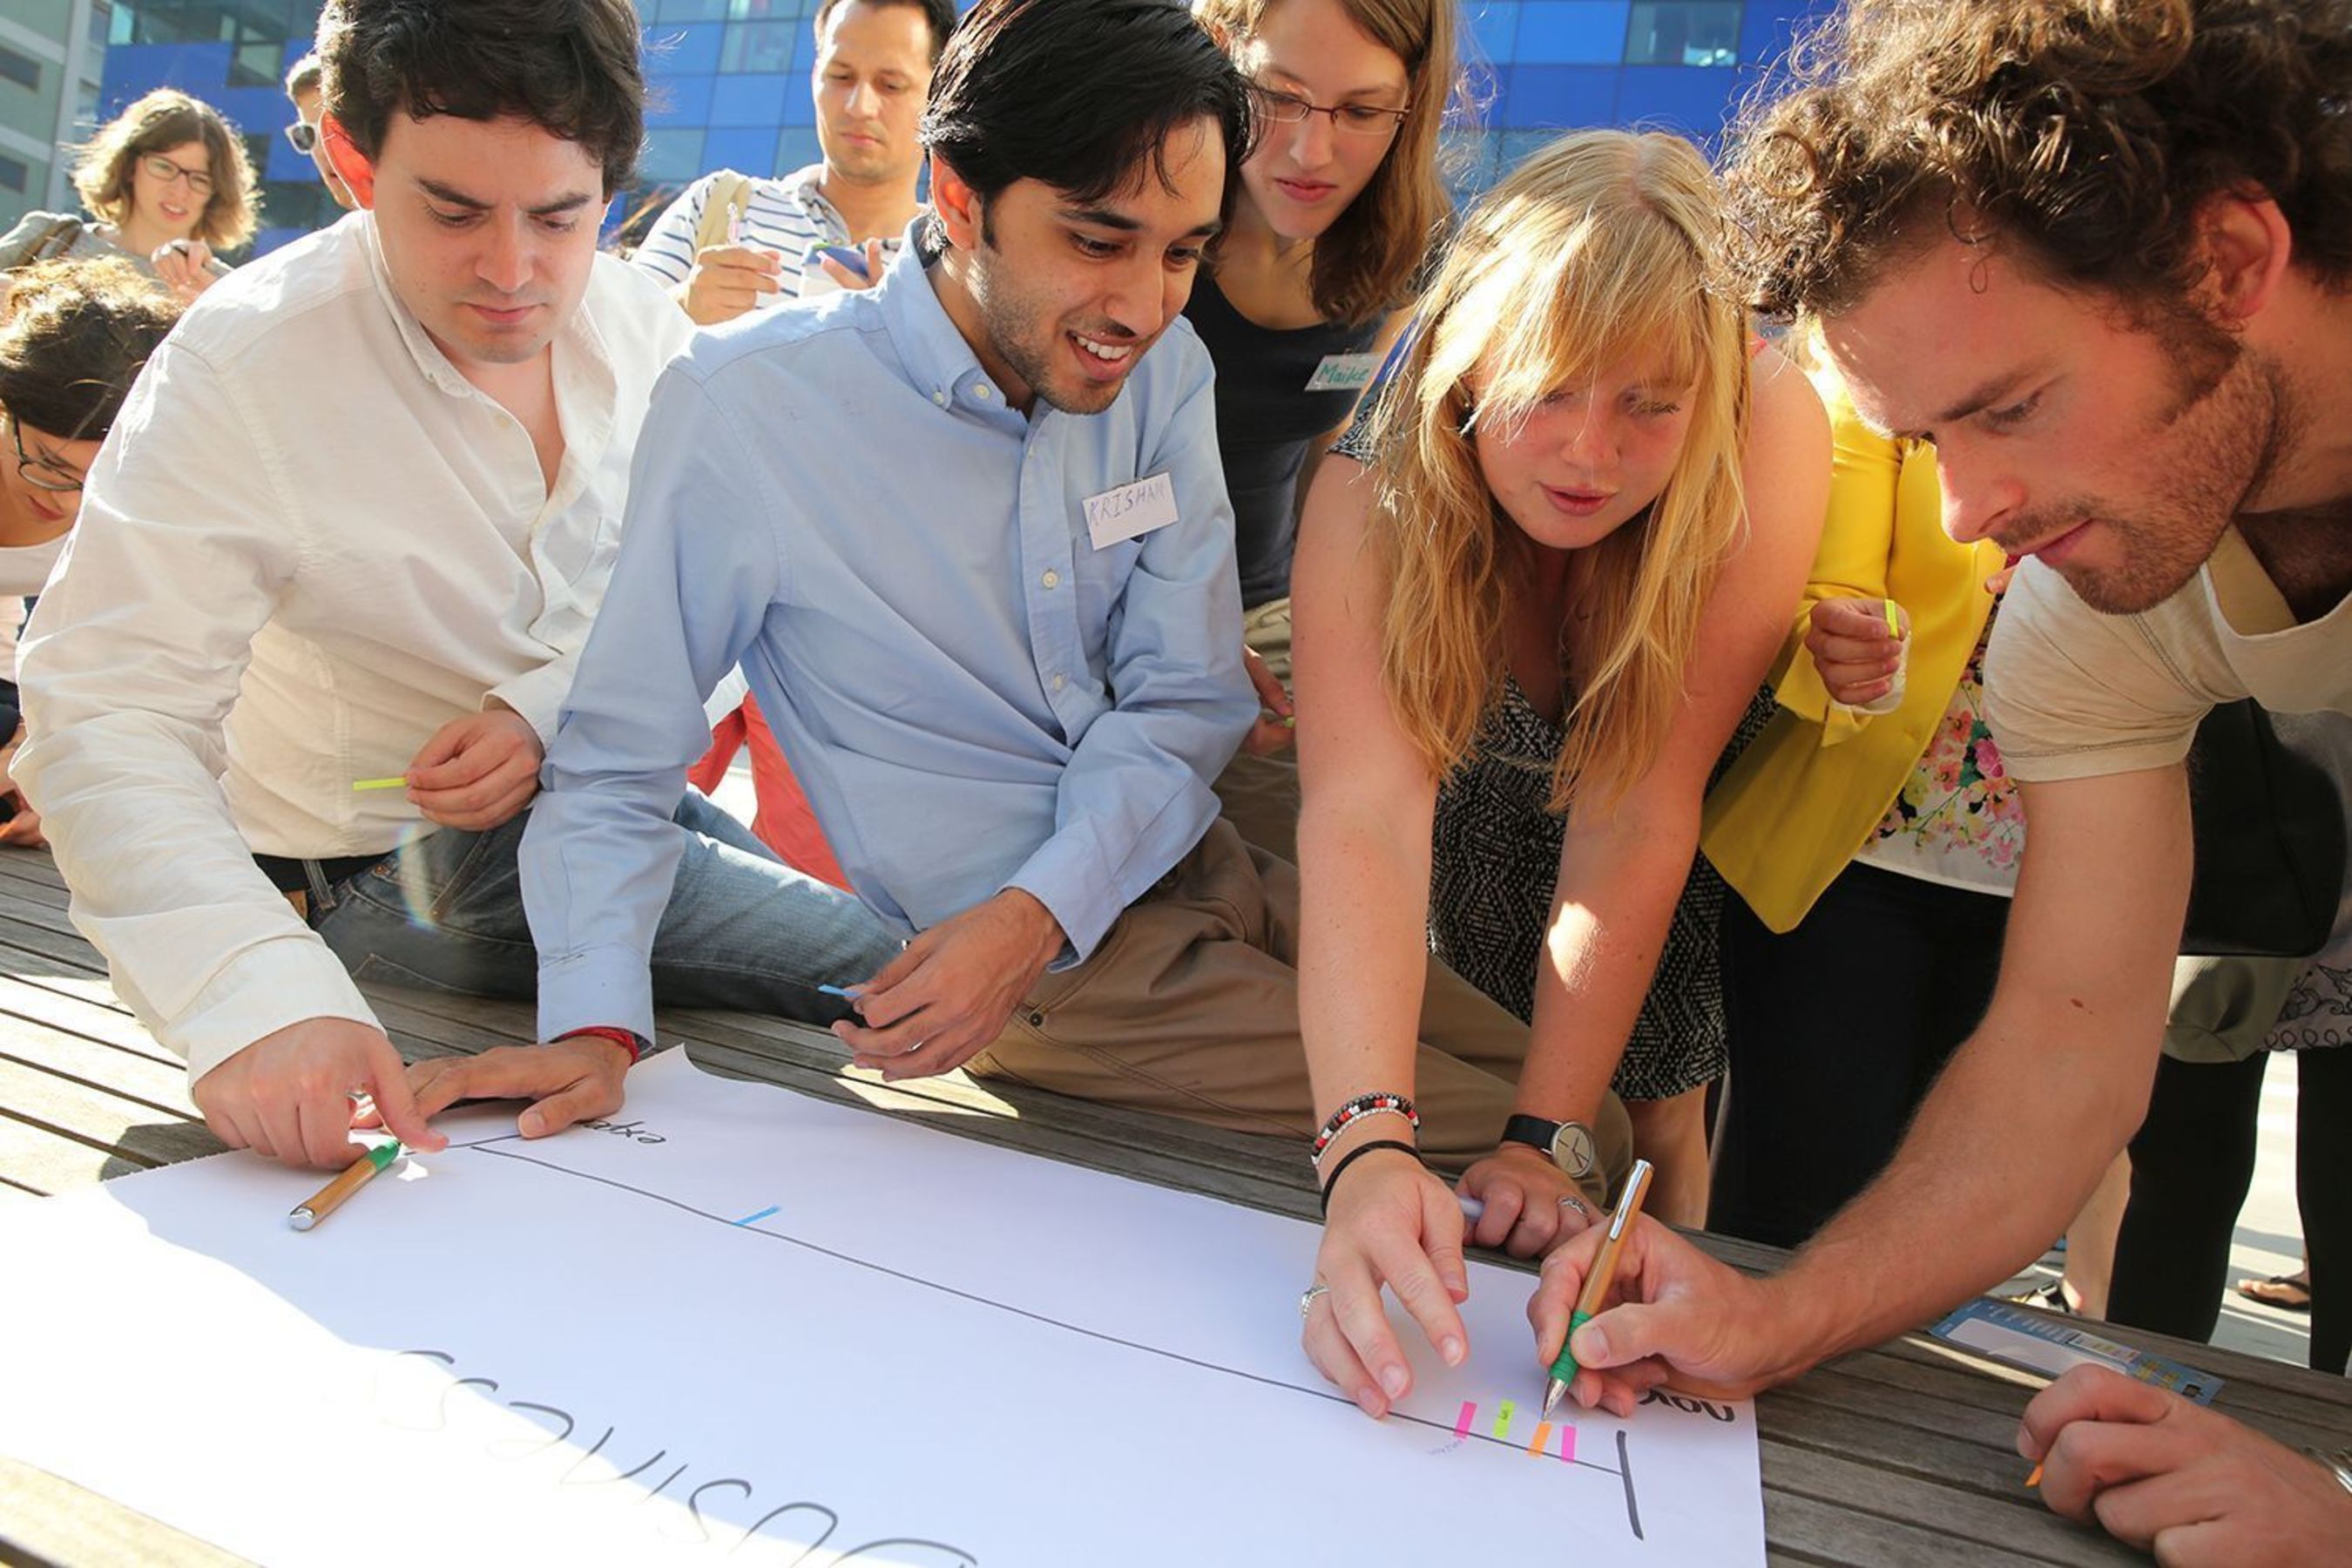 Students and graduates discuss a business plan that helps tackle climate change at Imperial College London, UK. Participants in the 2015 edition of Climate-KIC's European "The Journey" summer school programme work on ideas for solutions to real-world climate change related issues, and compete in teams. Based on their own creativity and climate knowledge, the teams present a detailed business plan to a judging panel consisting of leading European venture capitalists, startup entrepreneurs and scientists. (PRNewsFoto/Climate-KIC)